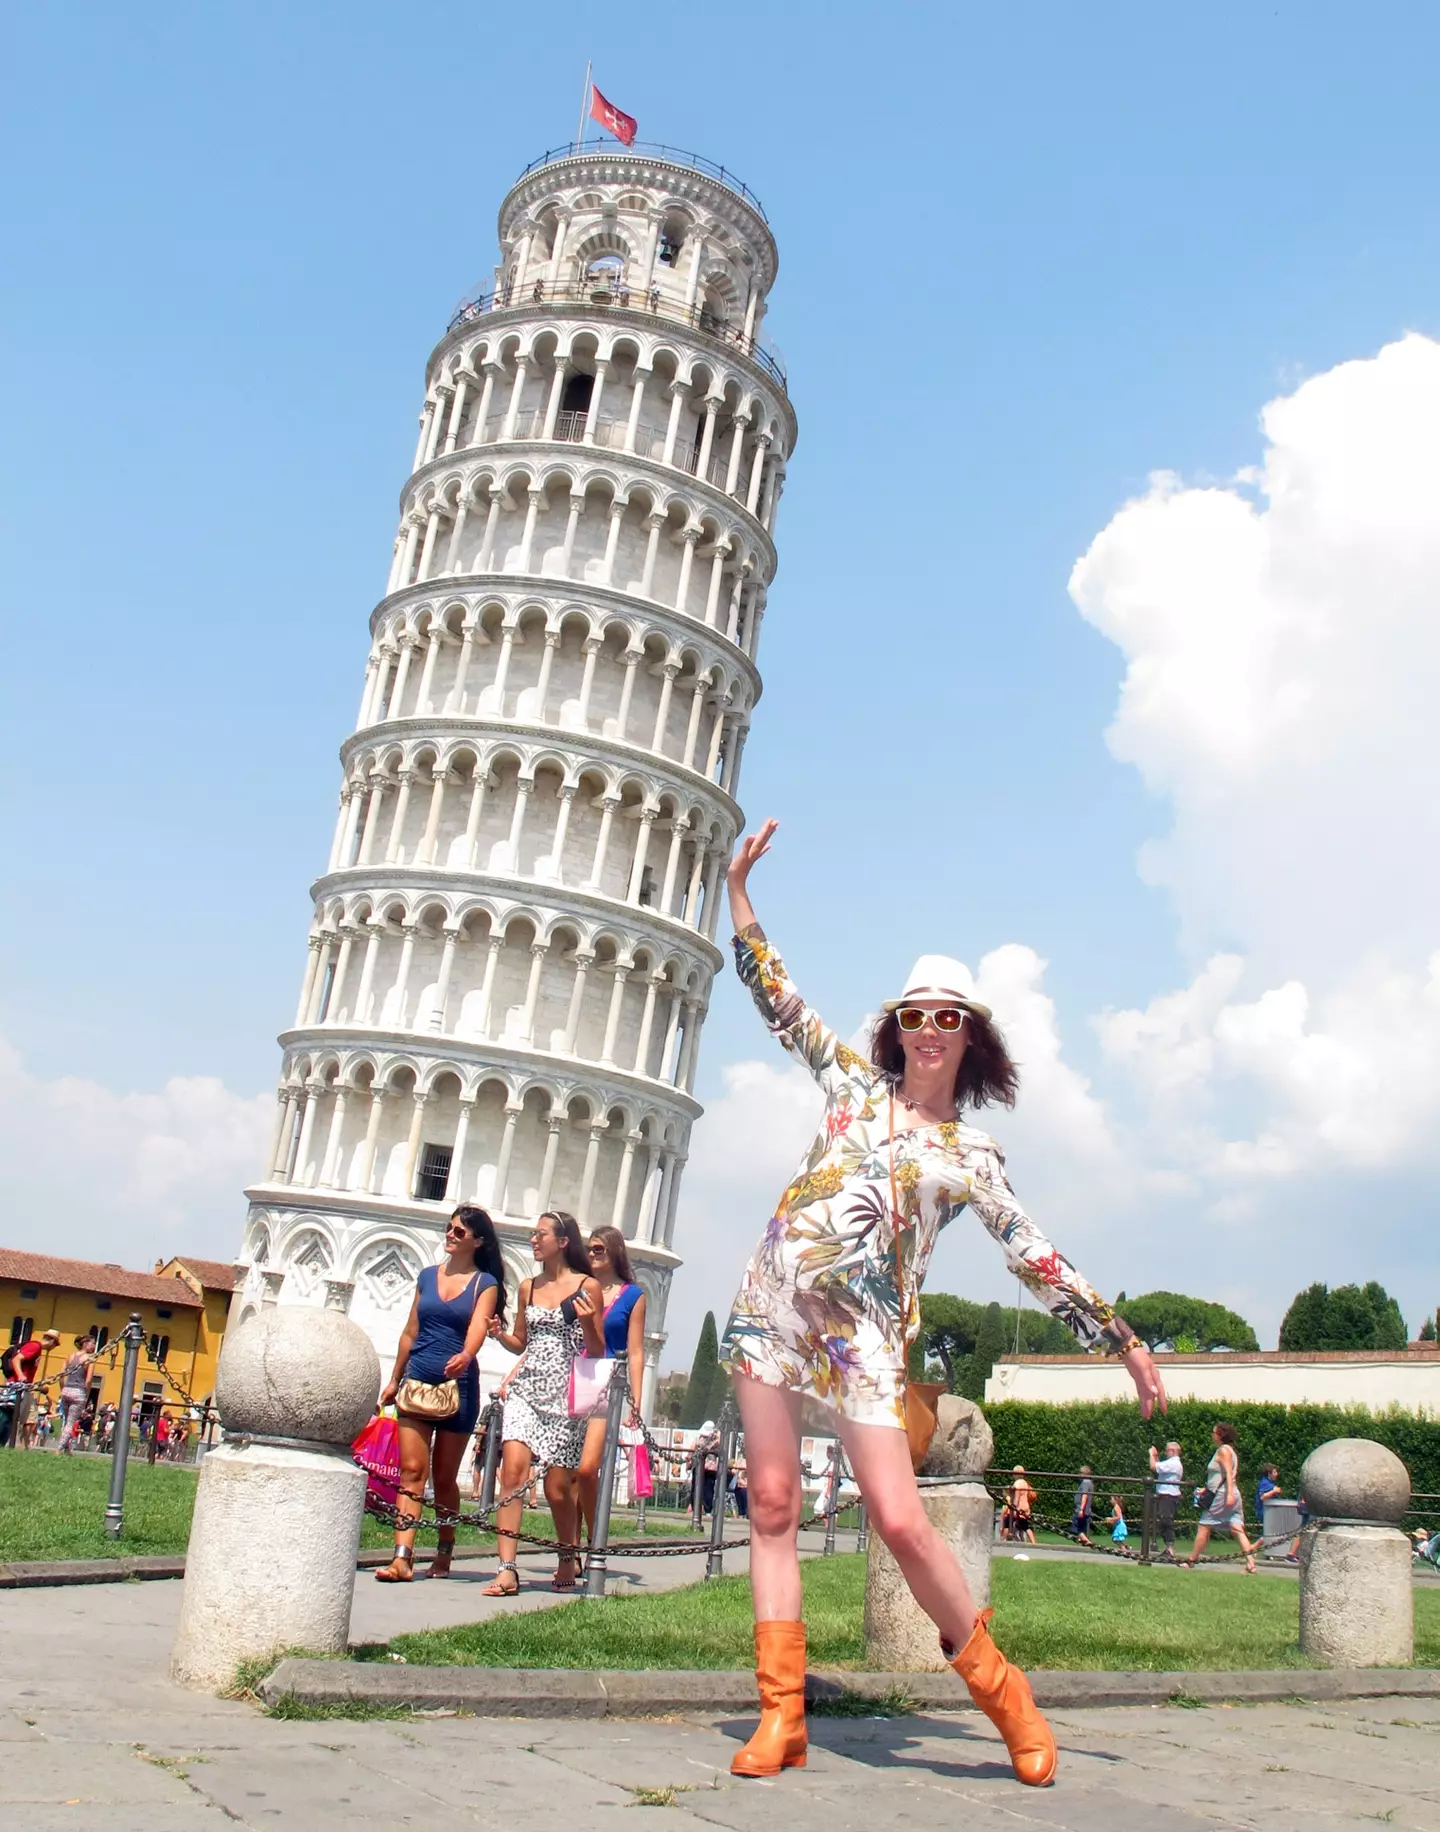 The Leaning Tower of Pisa has been a popular tourist attraction for many years.